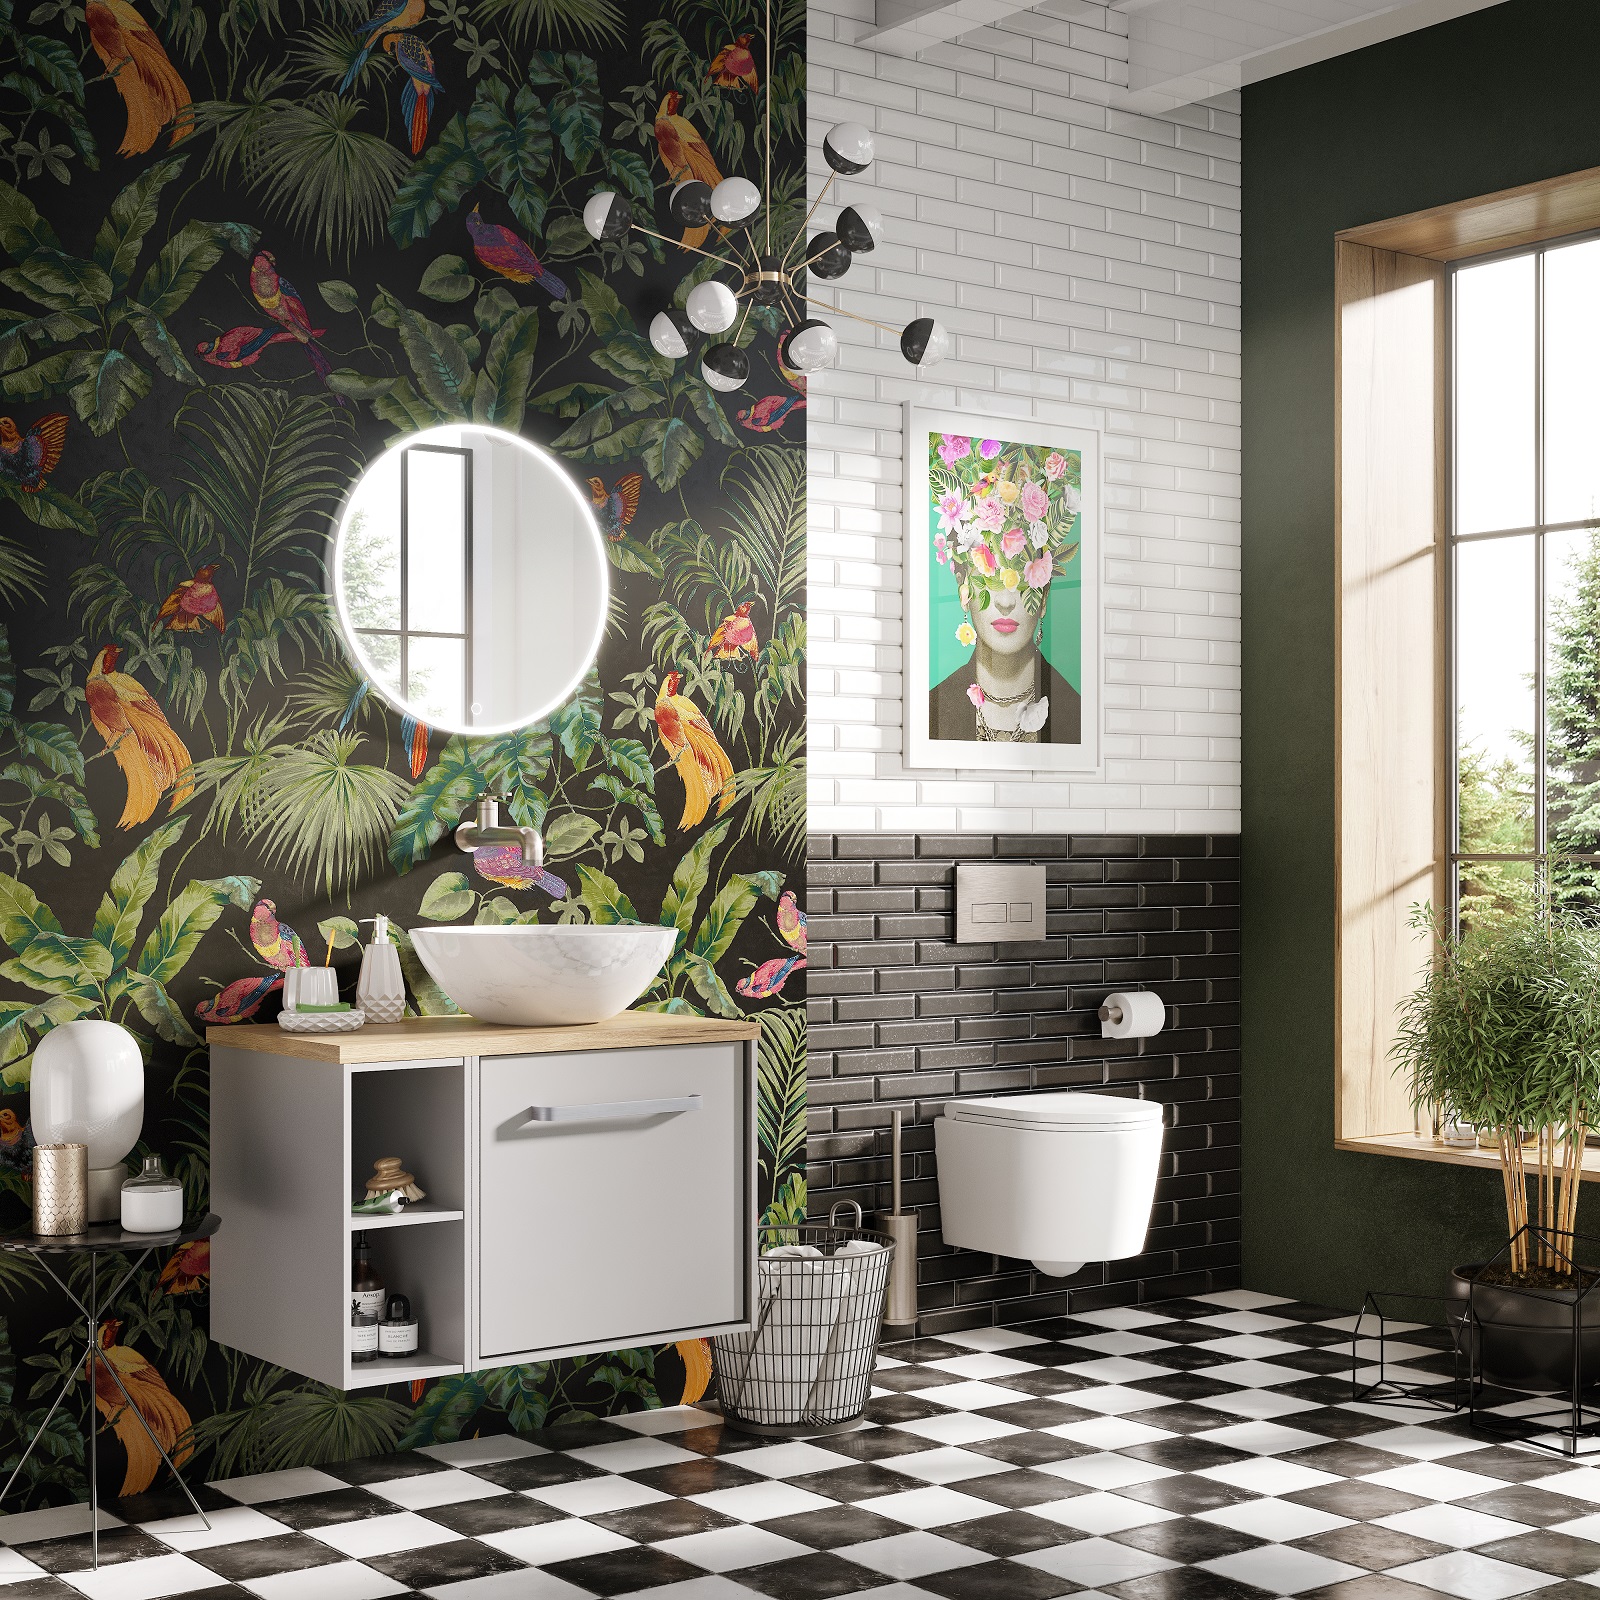 Lifestyle image of a black and white bathroom design, with chequerboard floors, contrasting black and white wall tiles, white washbasin unit and a tropical wallpaper with a black backdrop